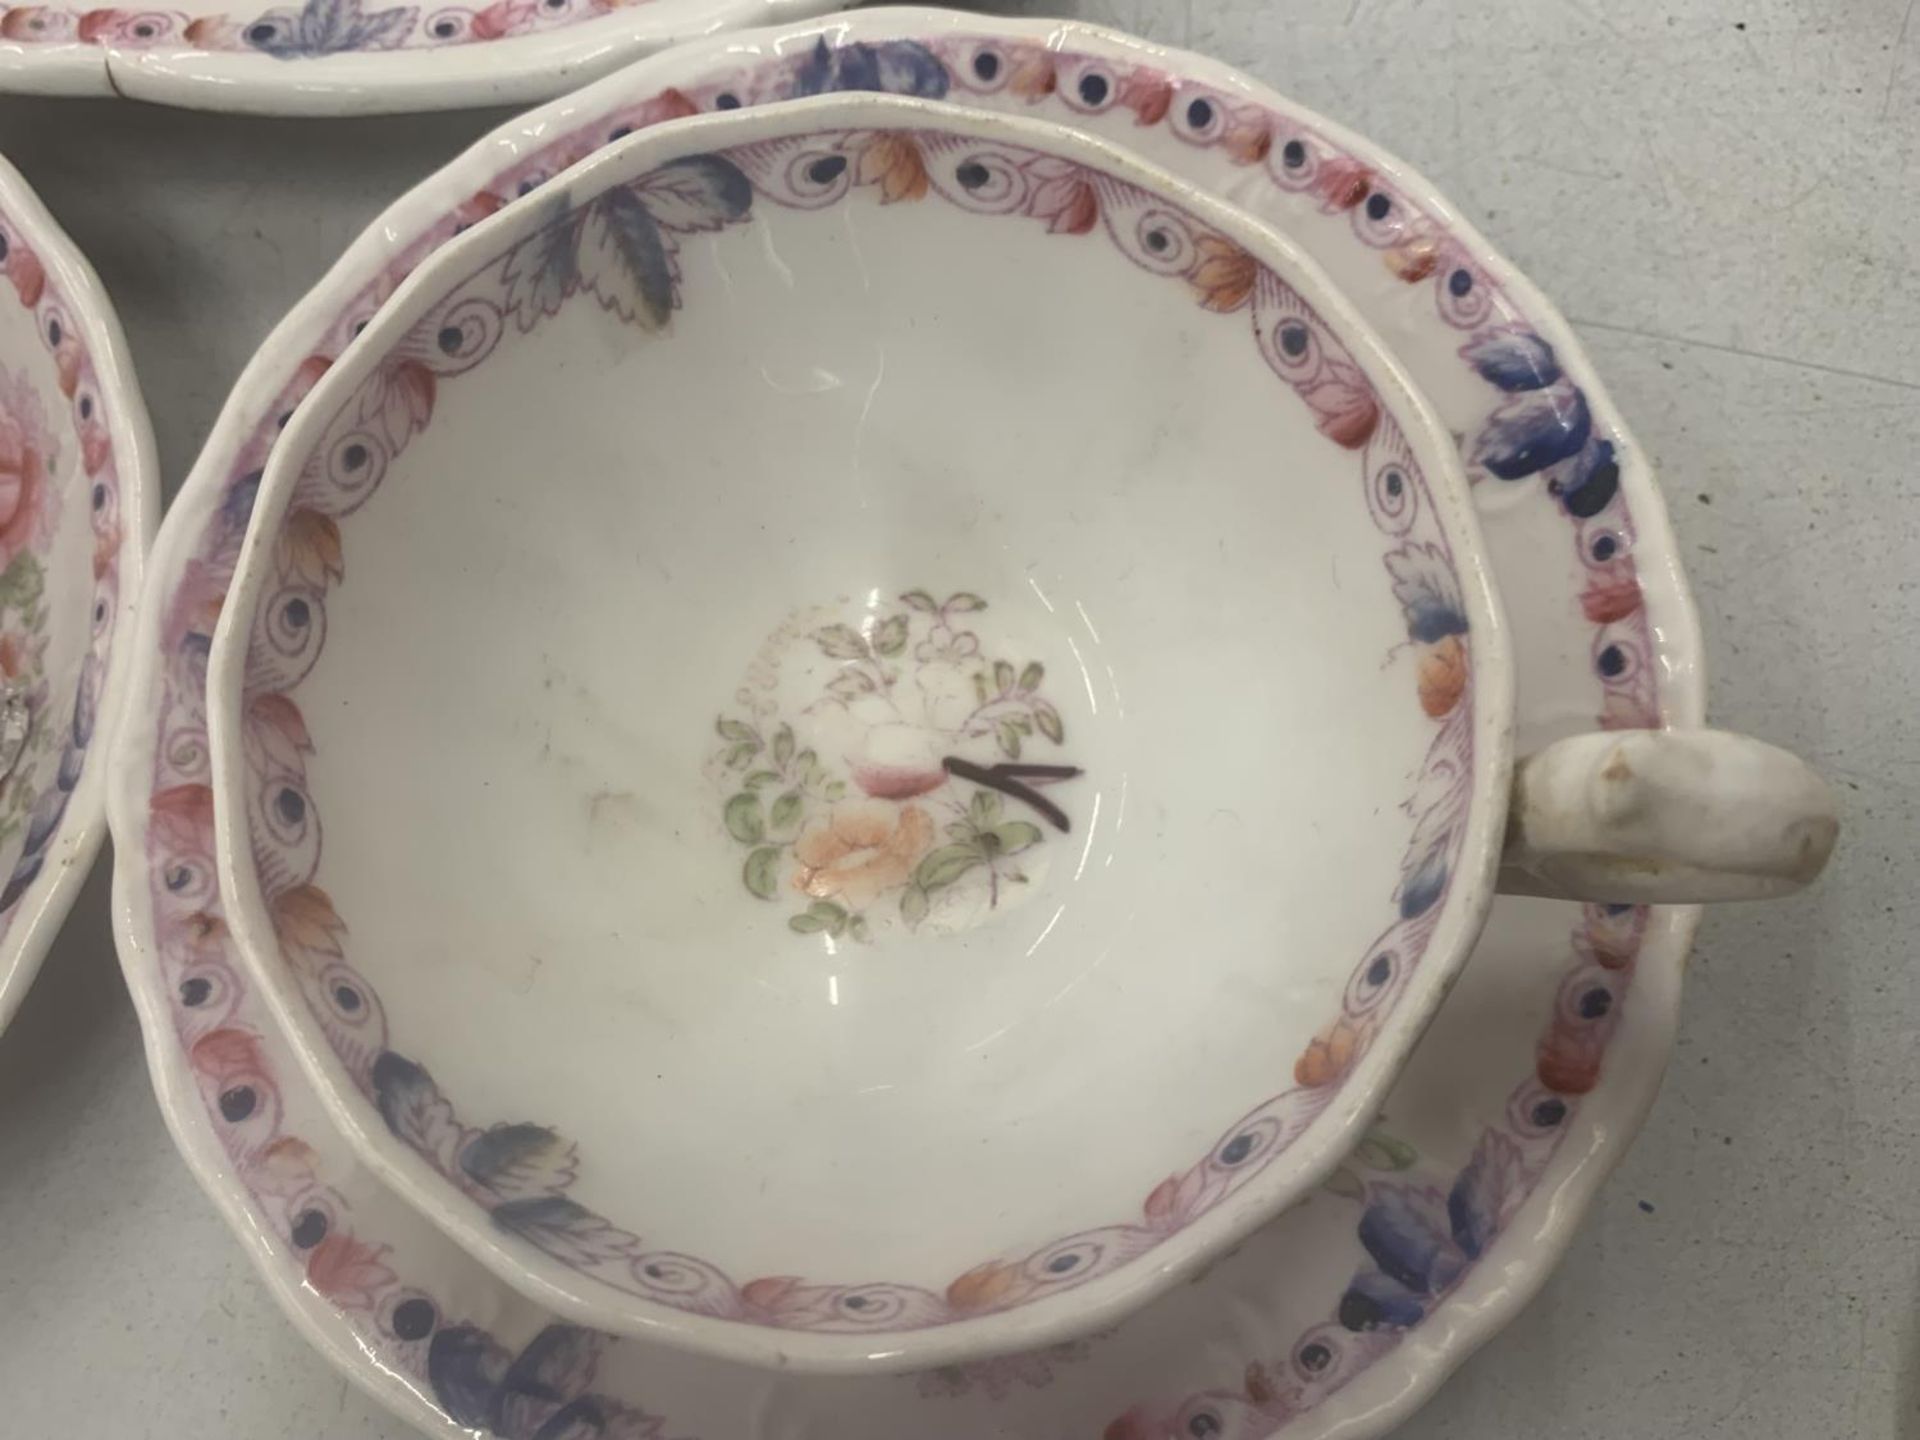 A QUANTITY OF LATE 18TH, EARLY 19TH CENTURY TEAWARE TO INCLUDE A LIDDED SUCRE BOWL, CAKE PLATES, - Image 3 of 5